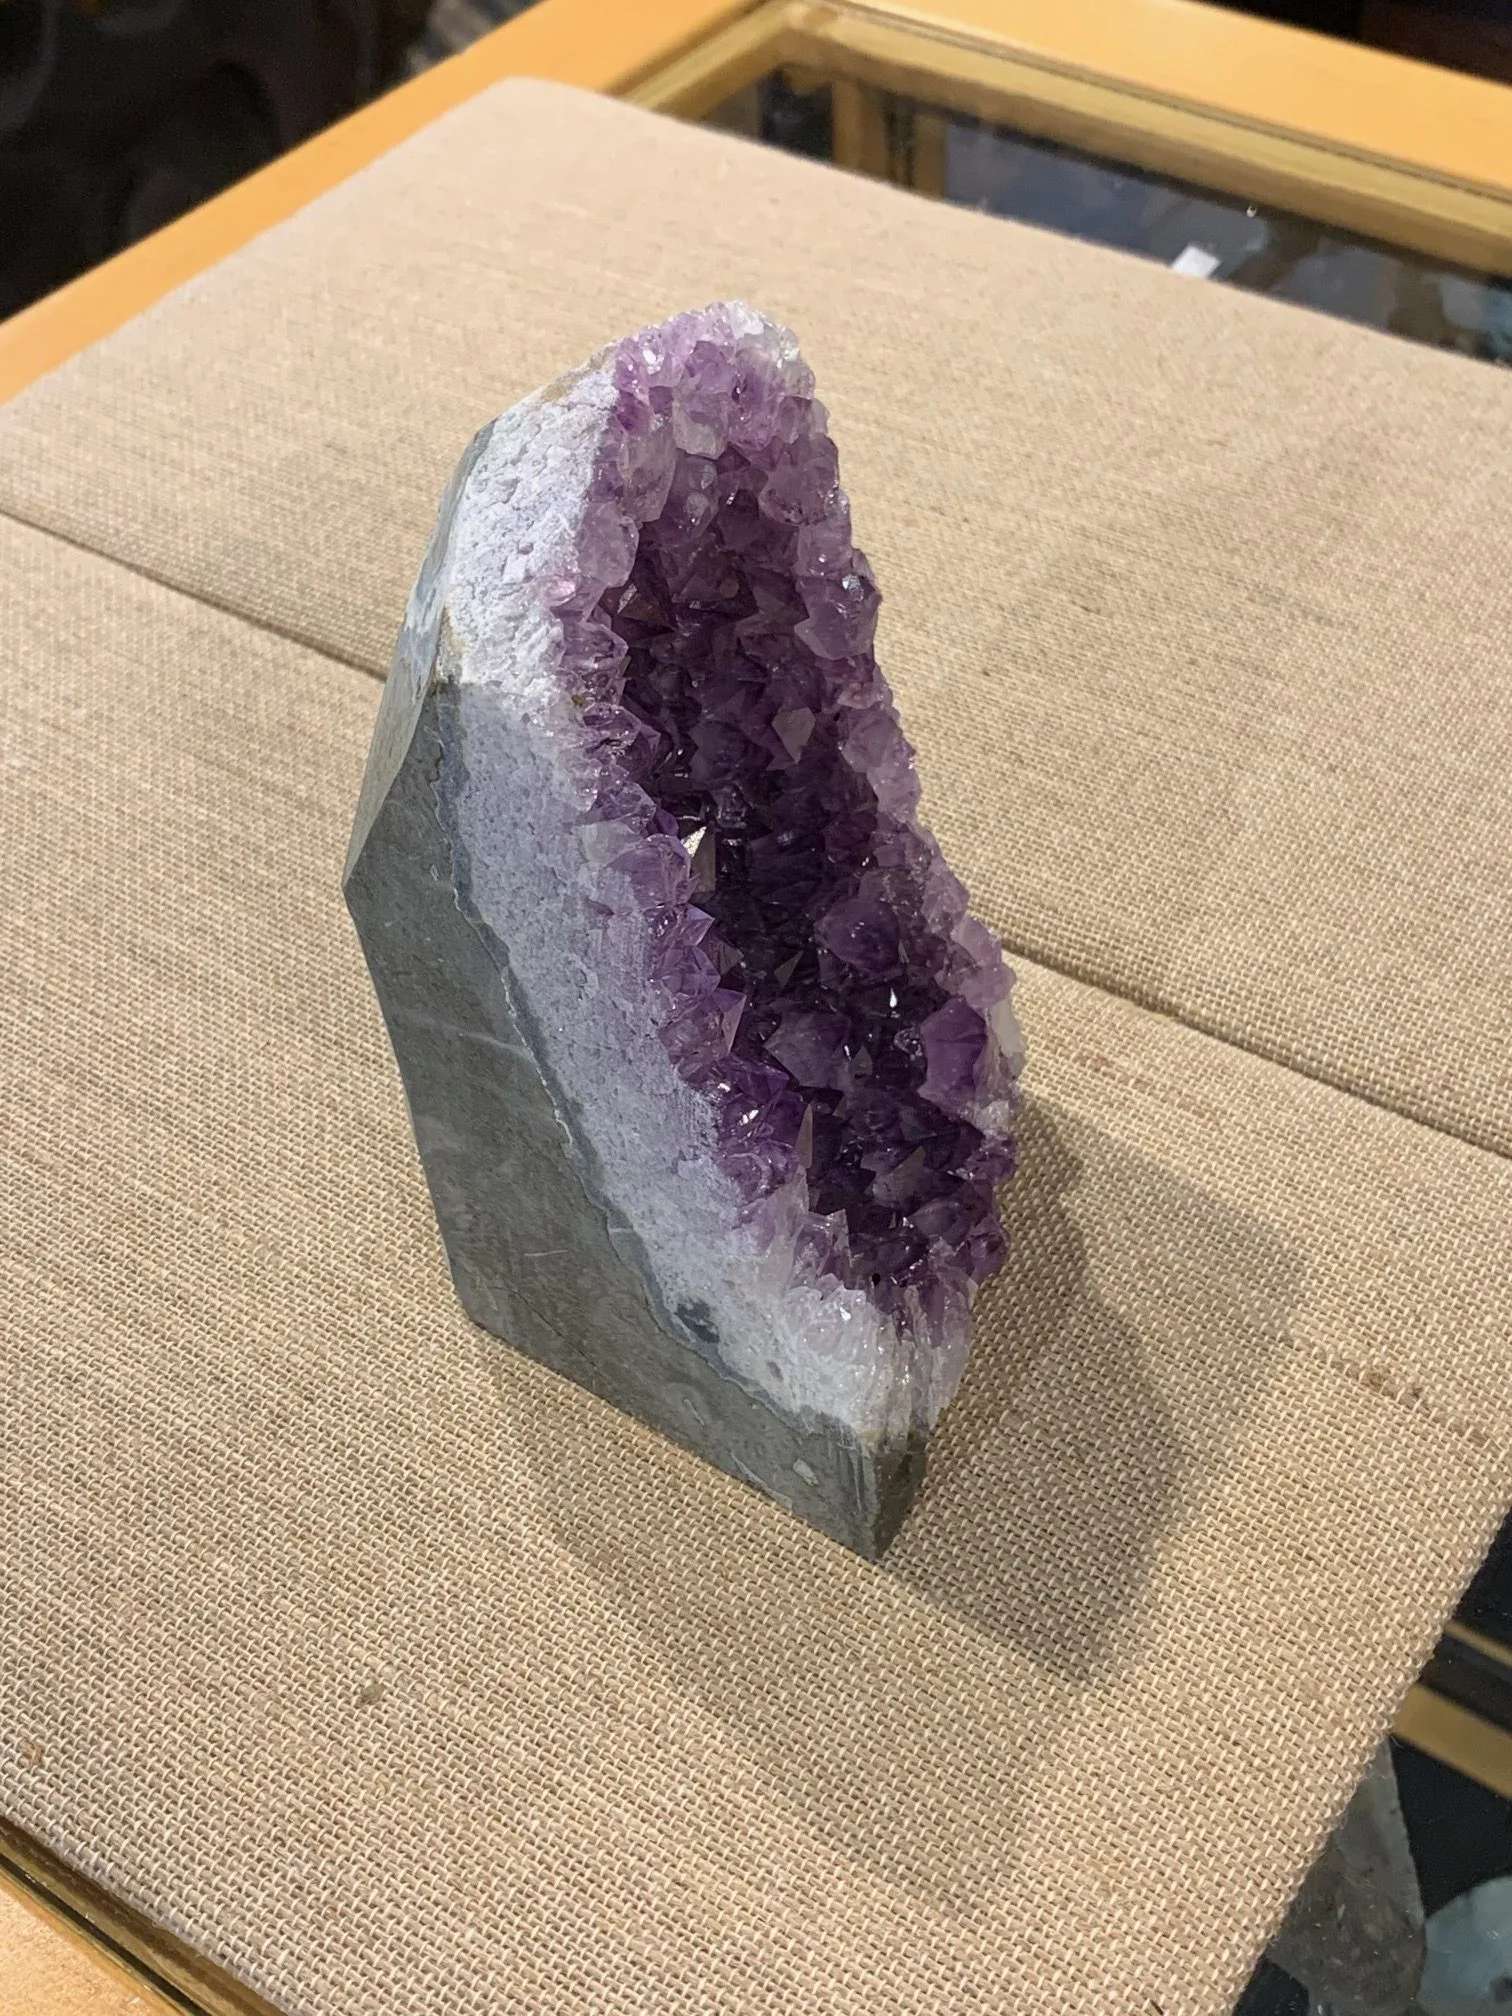 Amethyst Stand up, Uruguay Promotes Calm Prehistoric Online